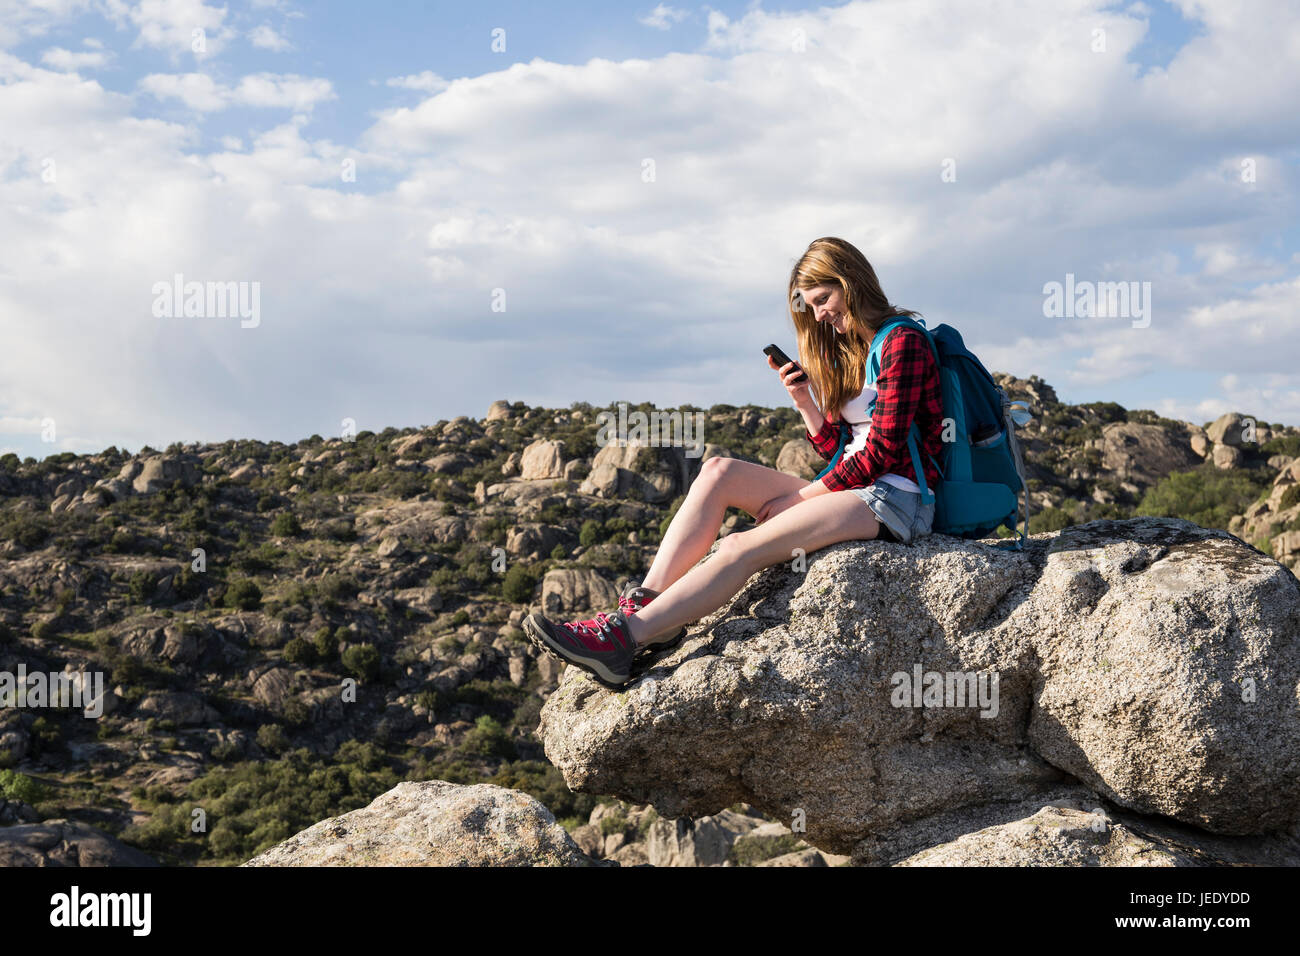 Spain, Madrid, young woman resting on a rock using her phone during a trekking day Stock Photo